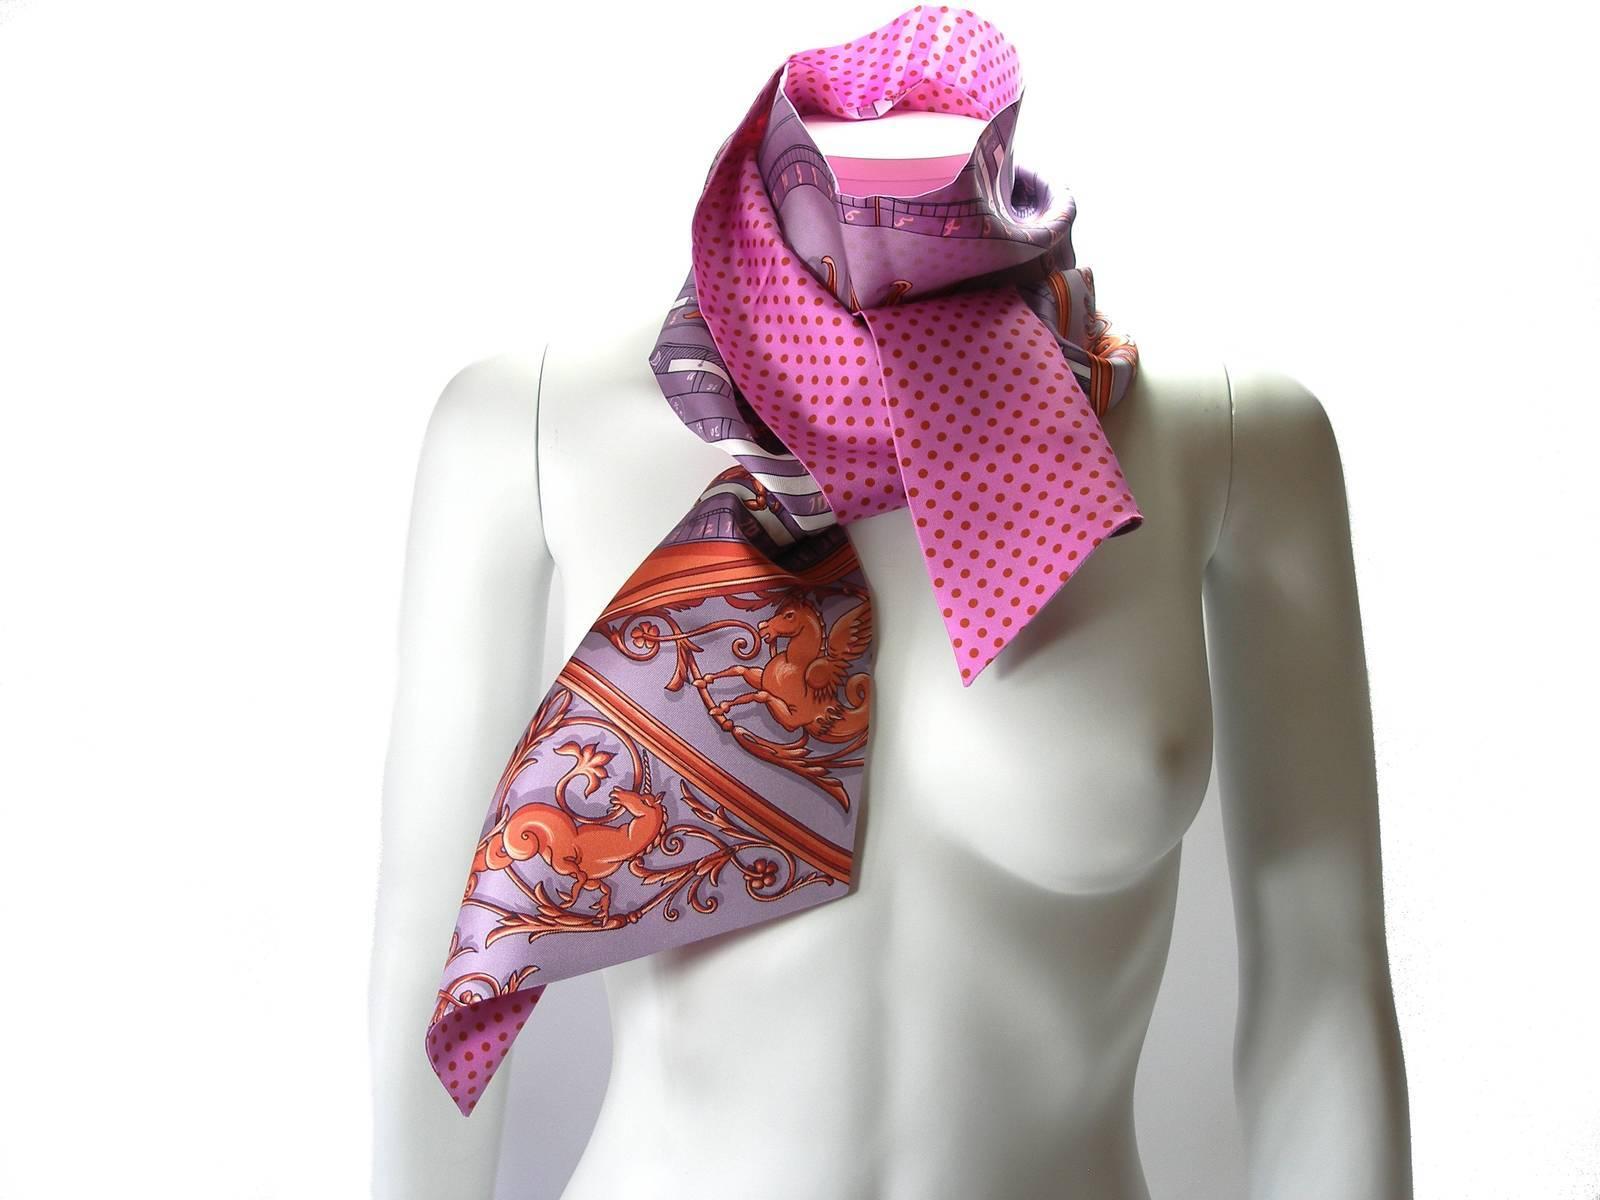 HERMÈS Scarf Maxi Twilly Astrologie Pois 
Twill Silk 
Year 2016 
Hermès Made in France
Multicolor / Pink 
Dimensions : 220 x 20 cm 
Like New
Sorry no box 
Thank you for visiting my shop !